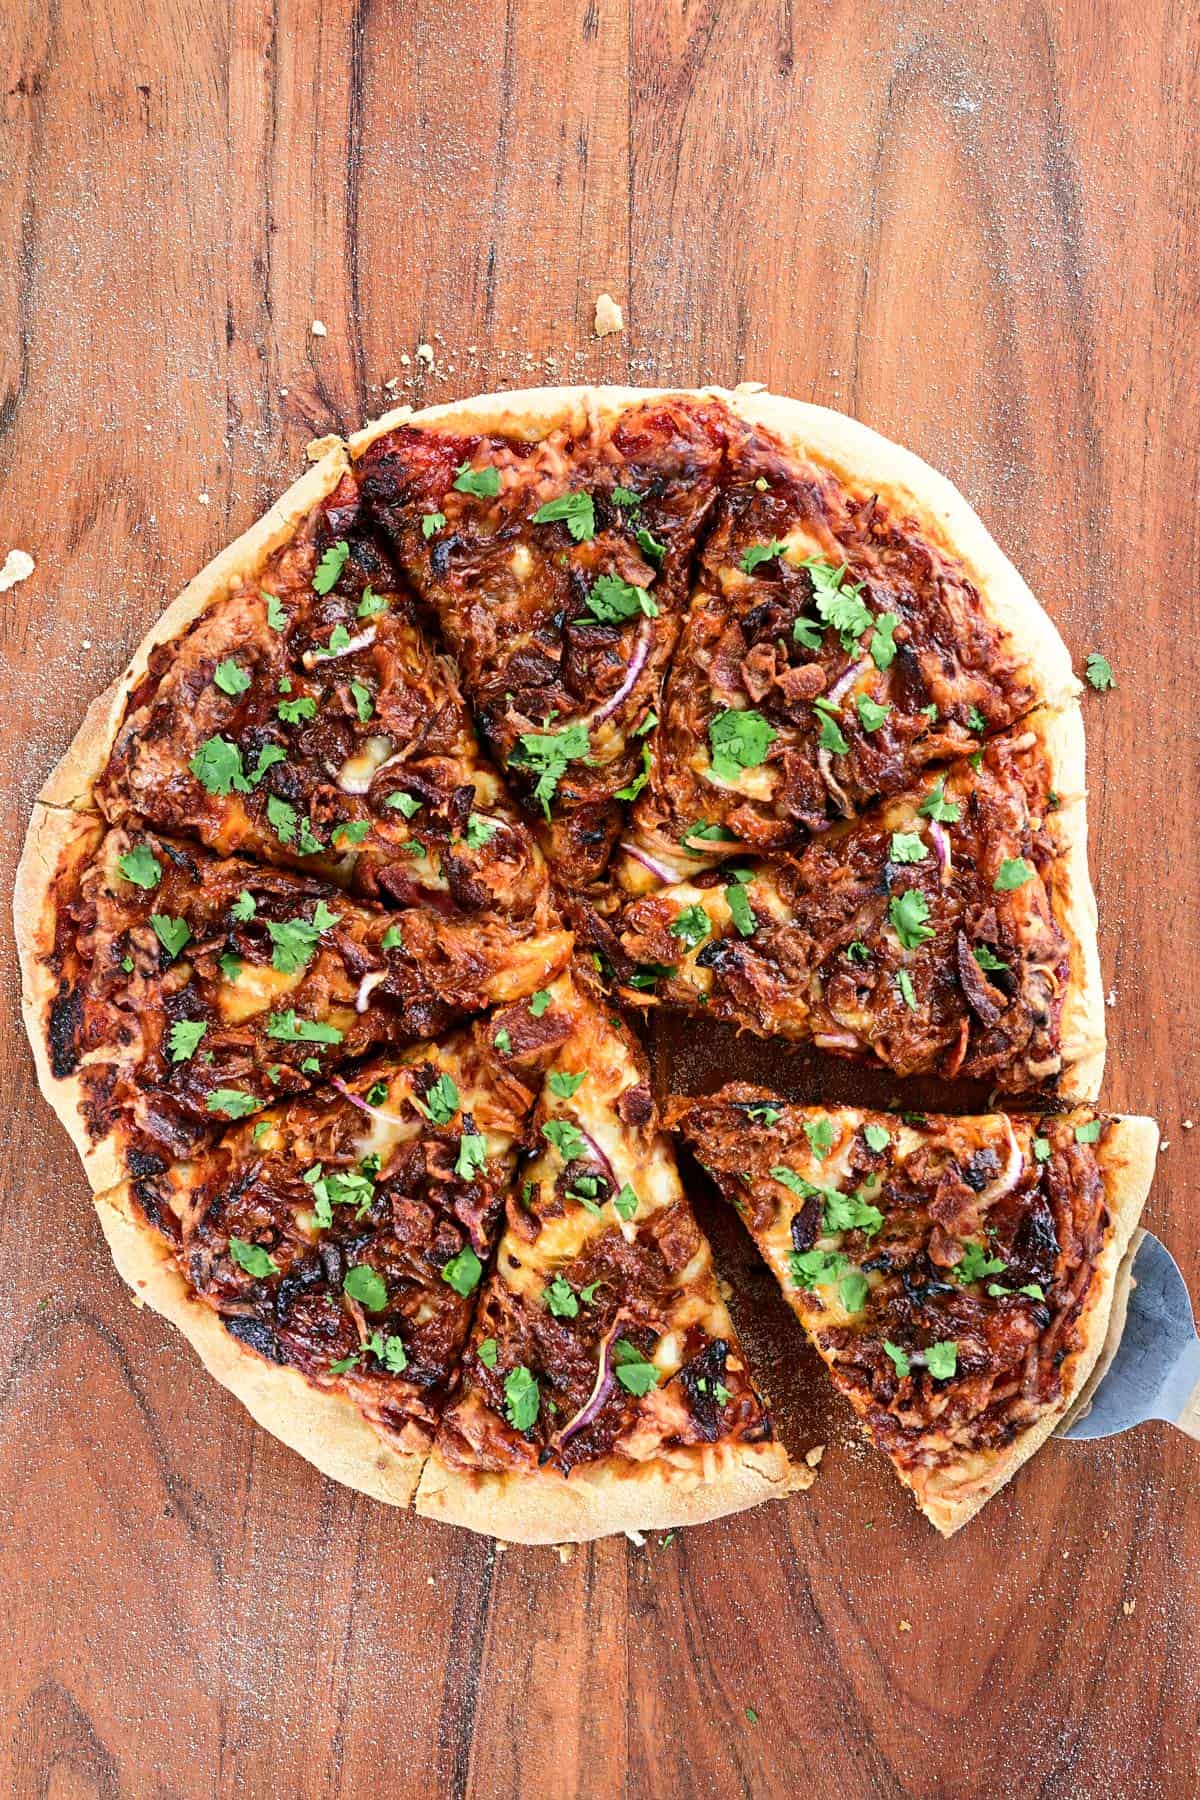 A slice of pizza is removed from a pulled pork pizza that is resting on a wooden cutting board.